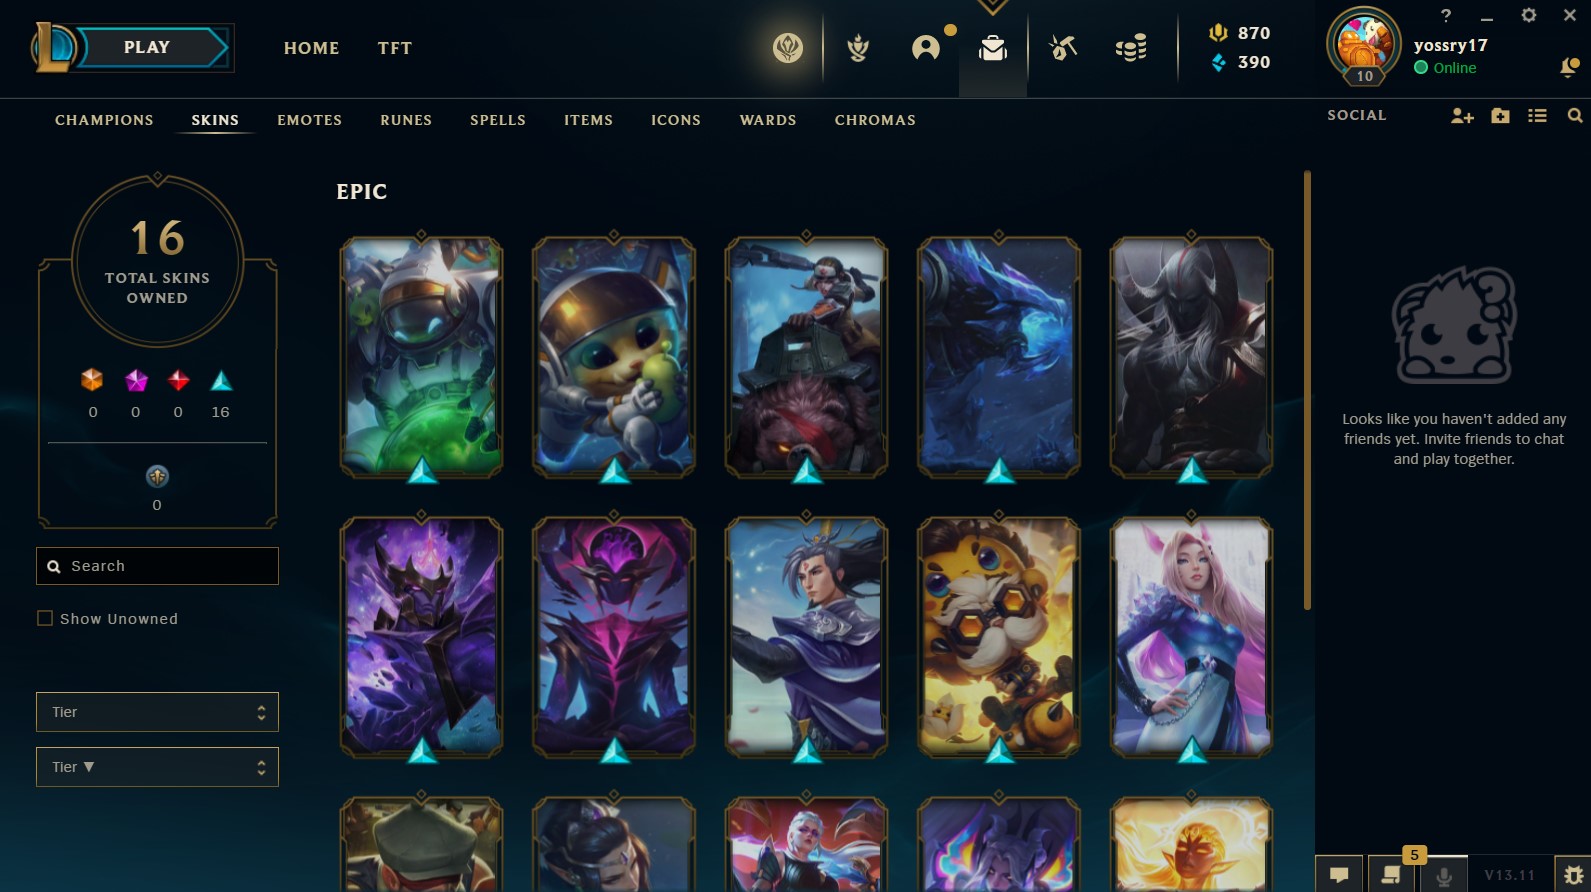 {EUW}lv10 ACCOUNT Handleveled with (+16 epic skin +55mythic ) check Discretion